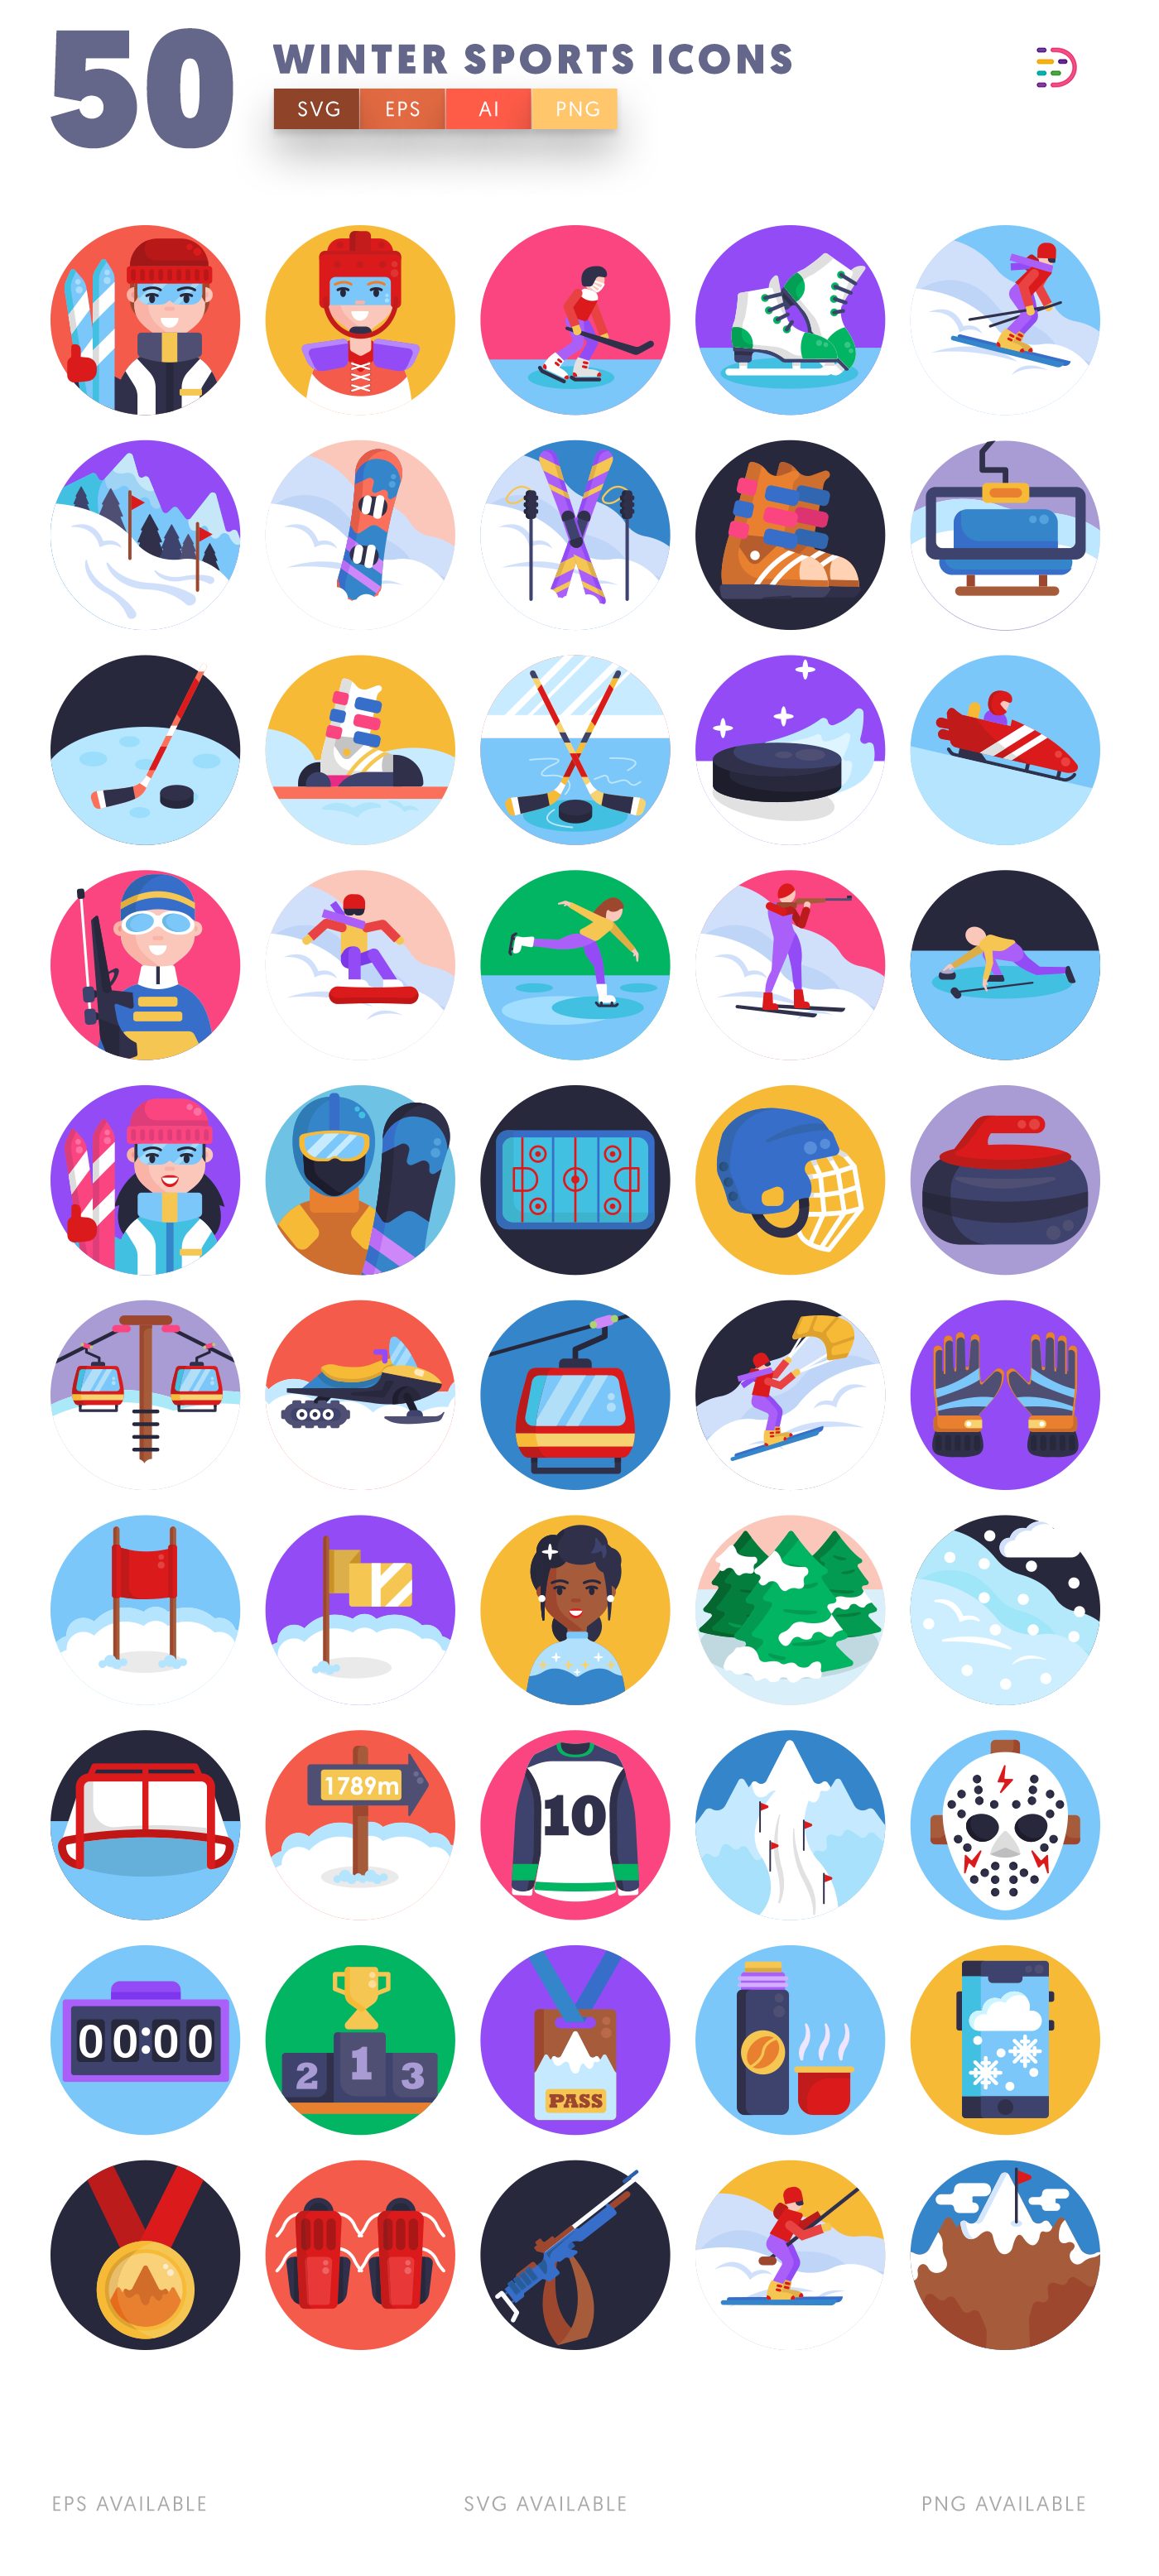 Winter Sports icon pack